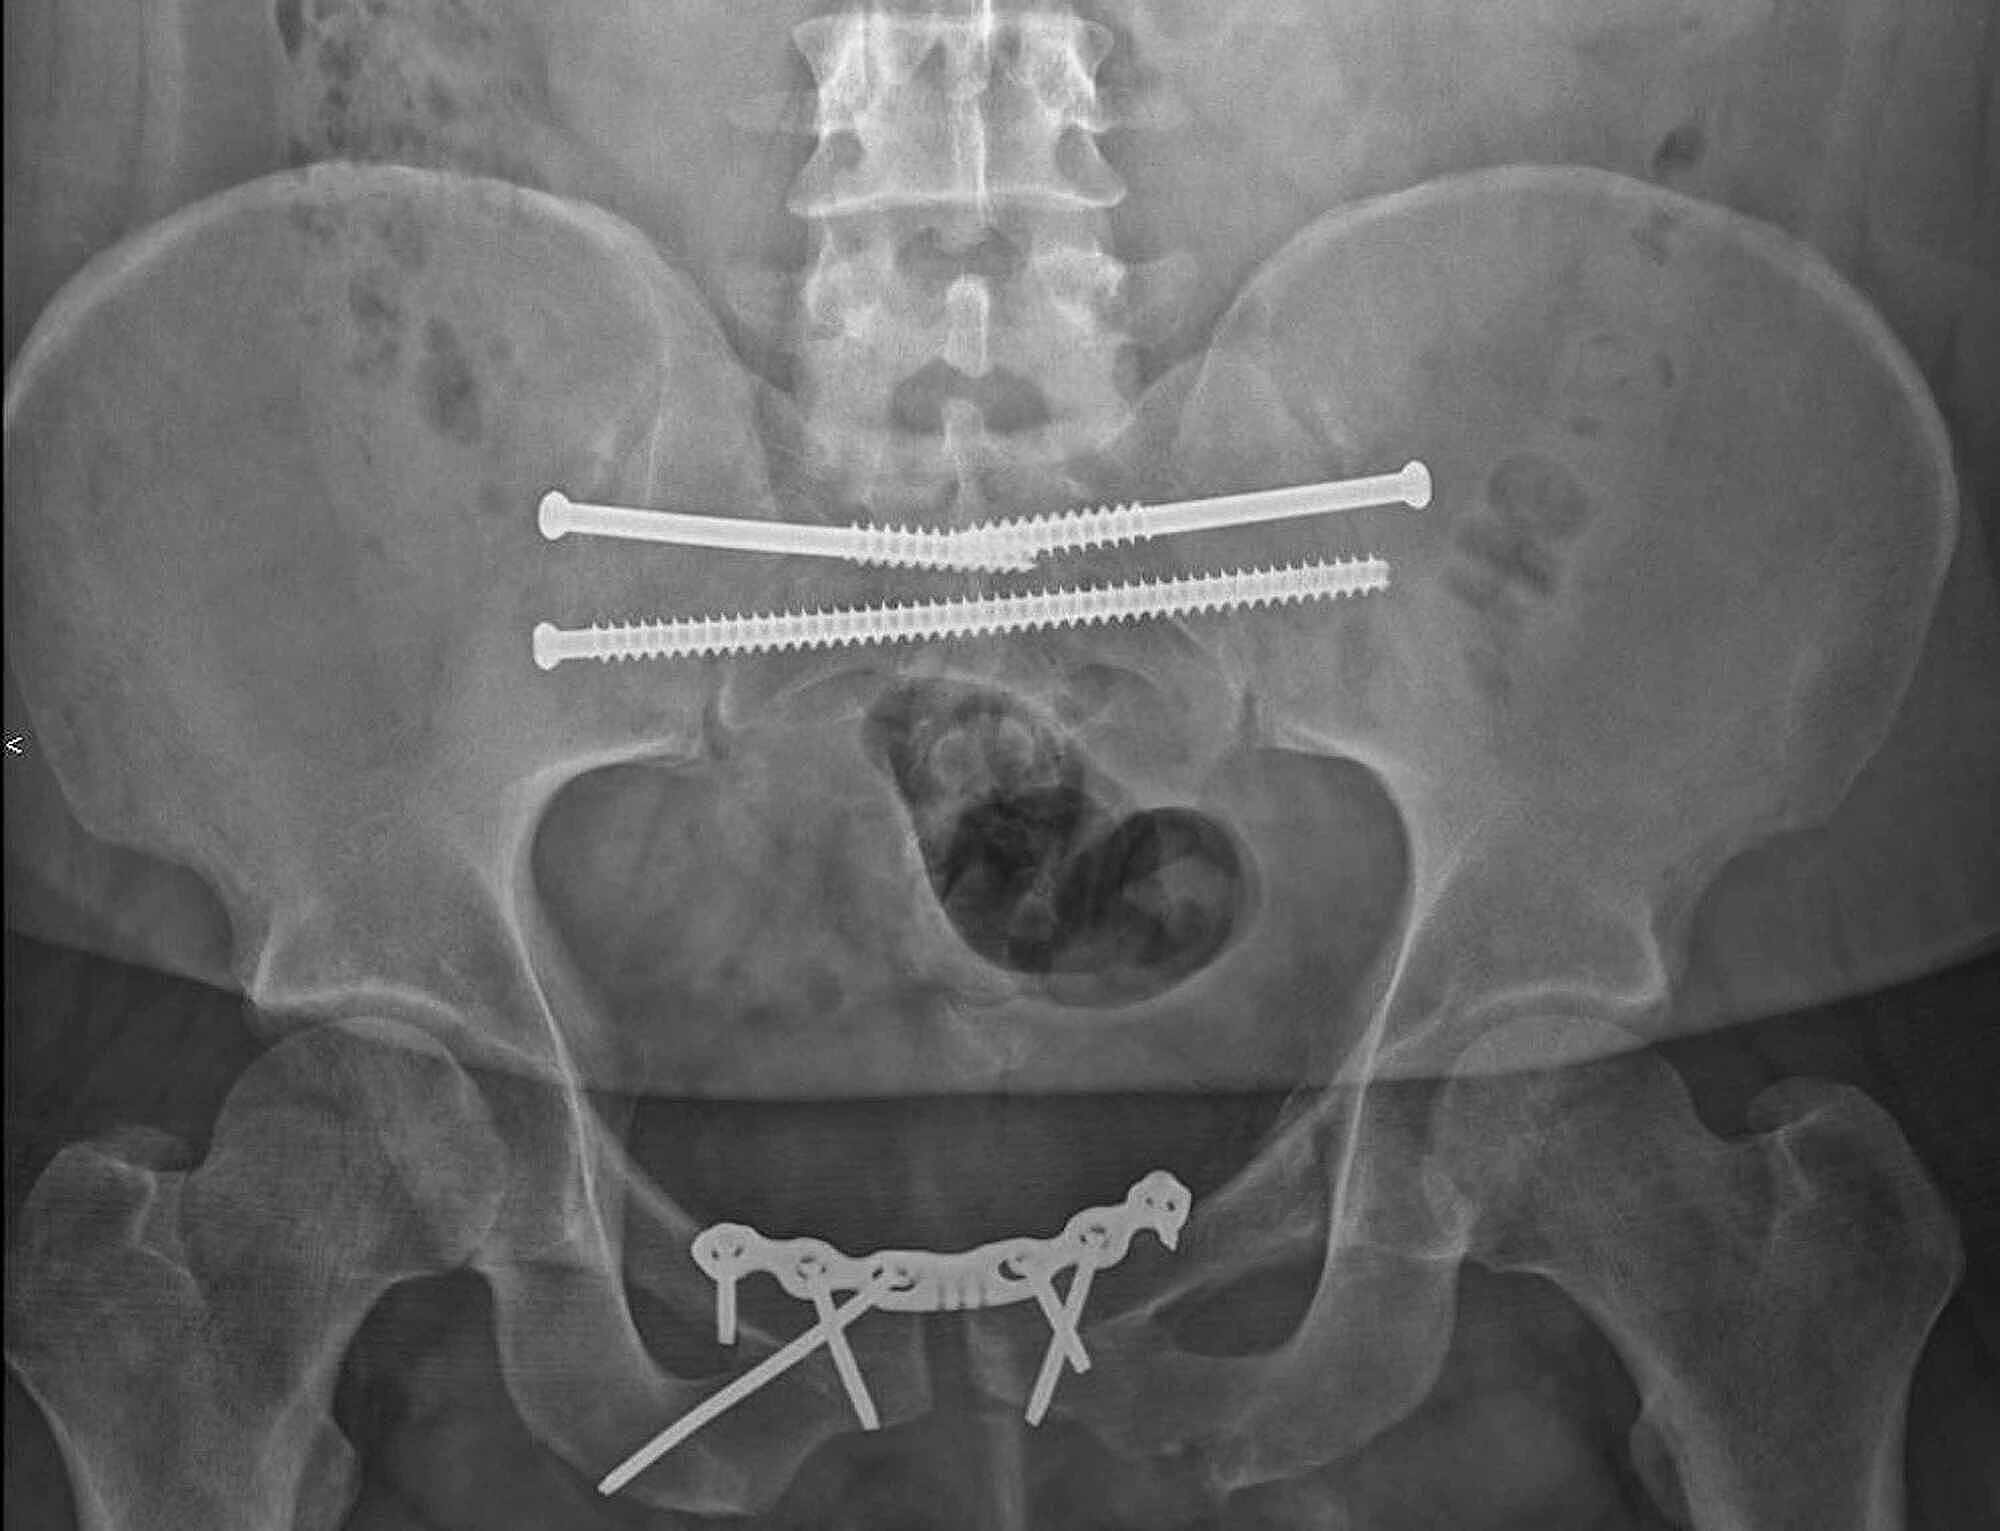 X-ray image to stabilize the pelvis from the inside in the event of a pelvic fracture